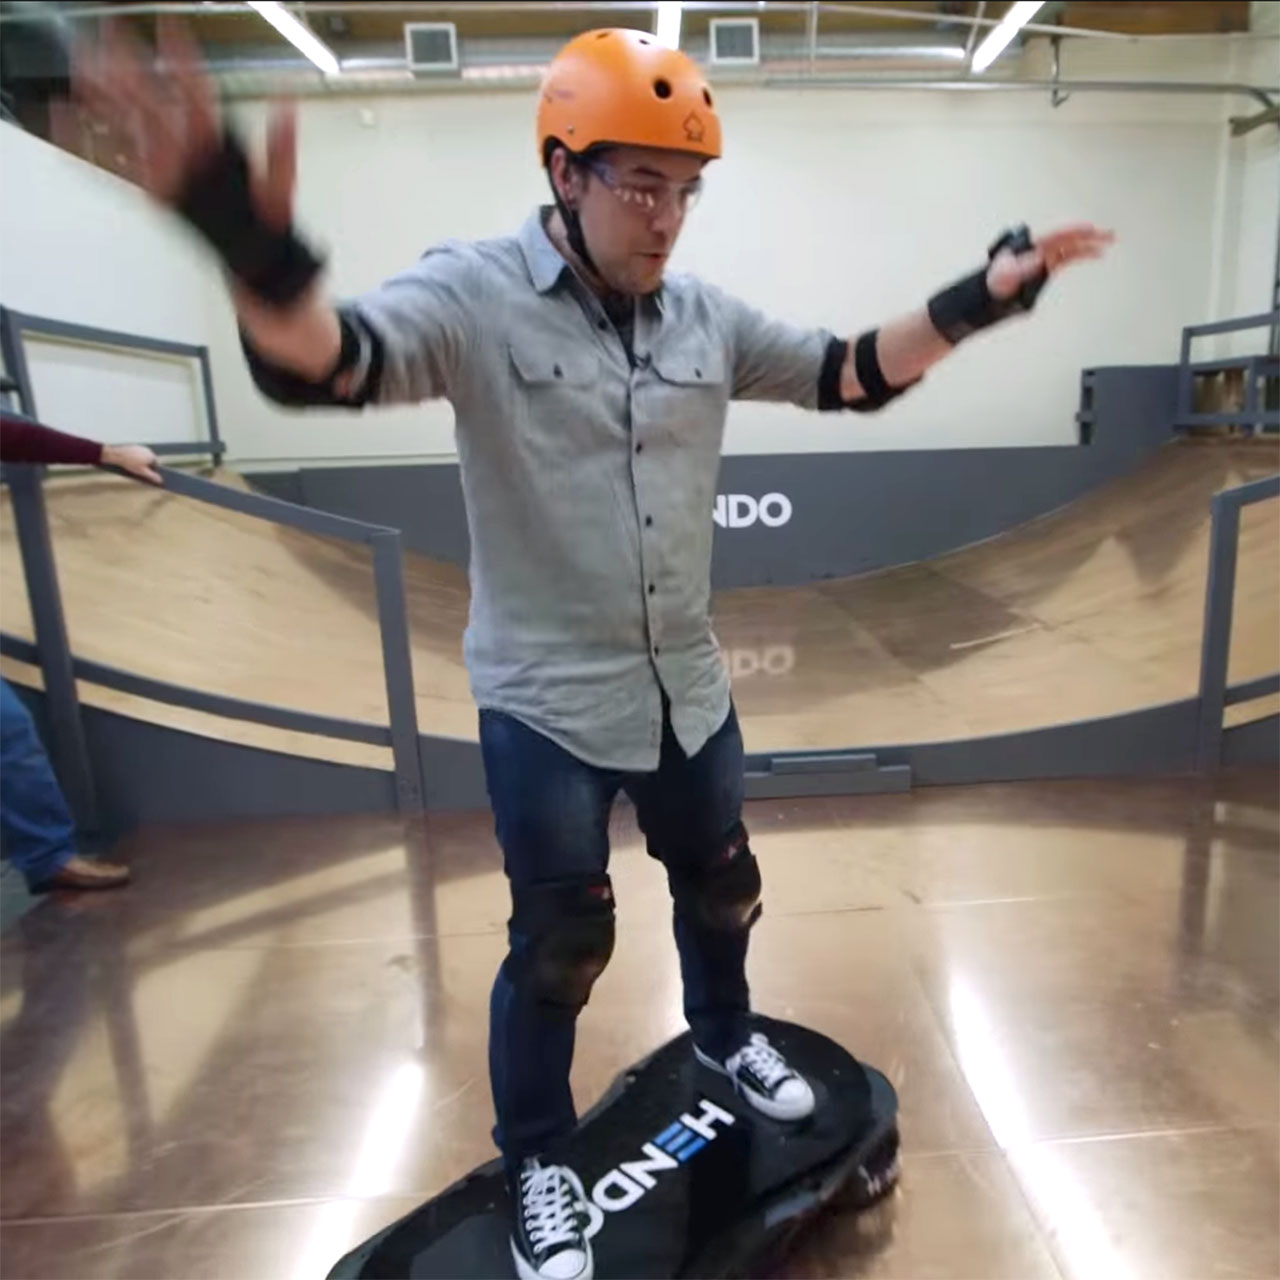 Hendo Hoverboard will let you float for 10,000 dollars